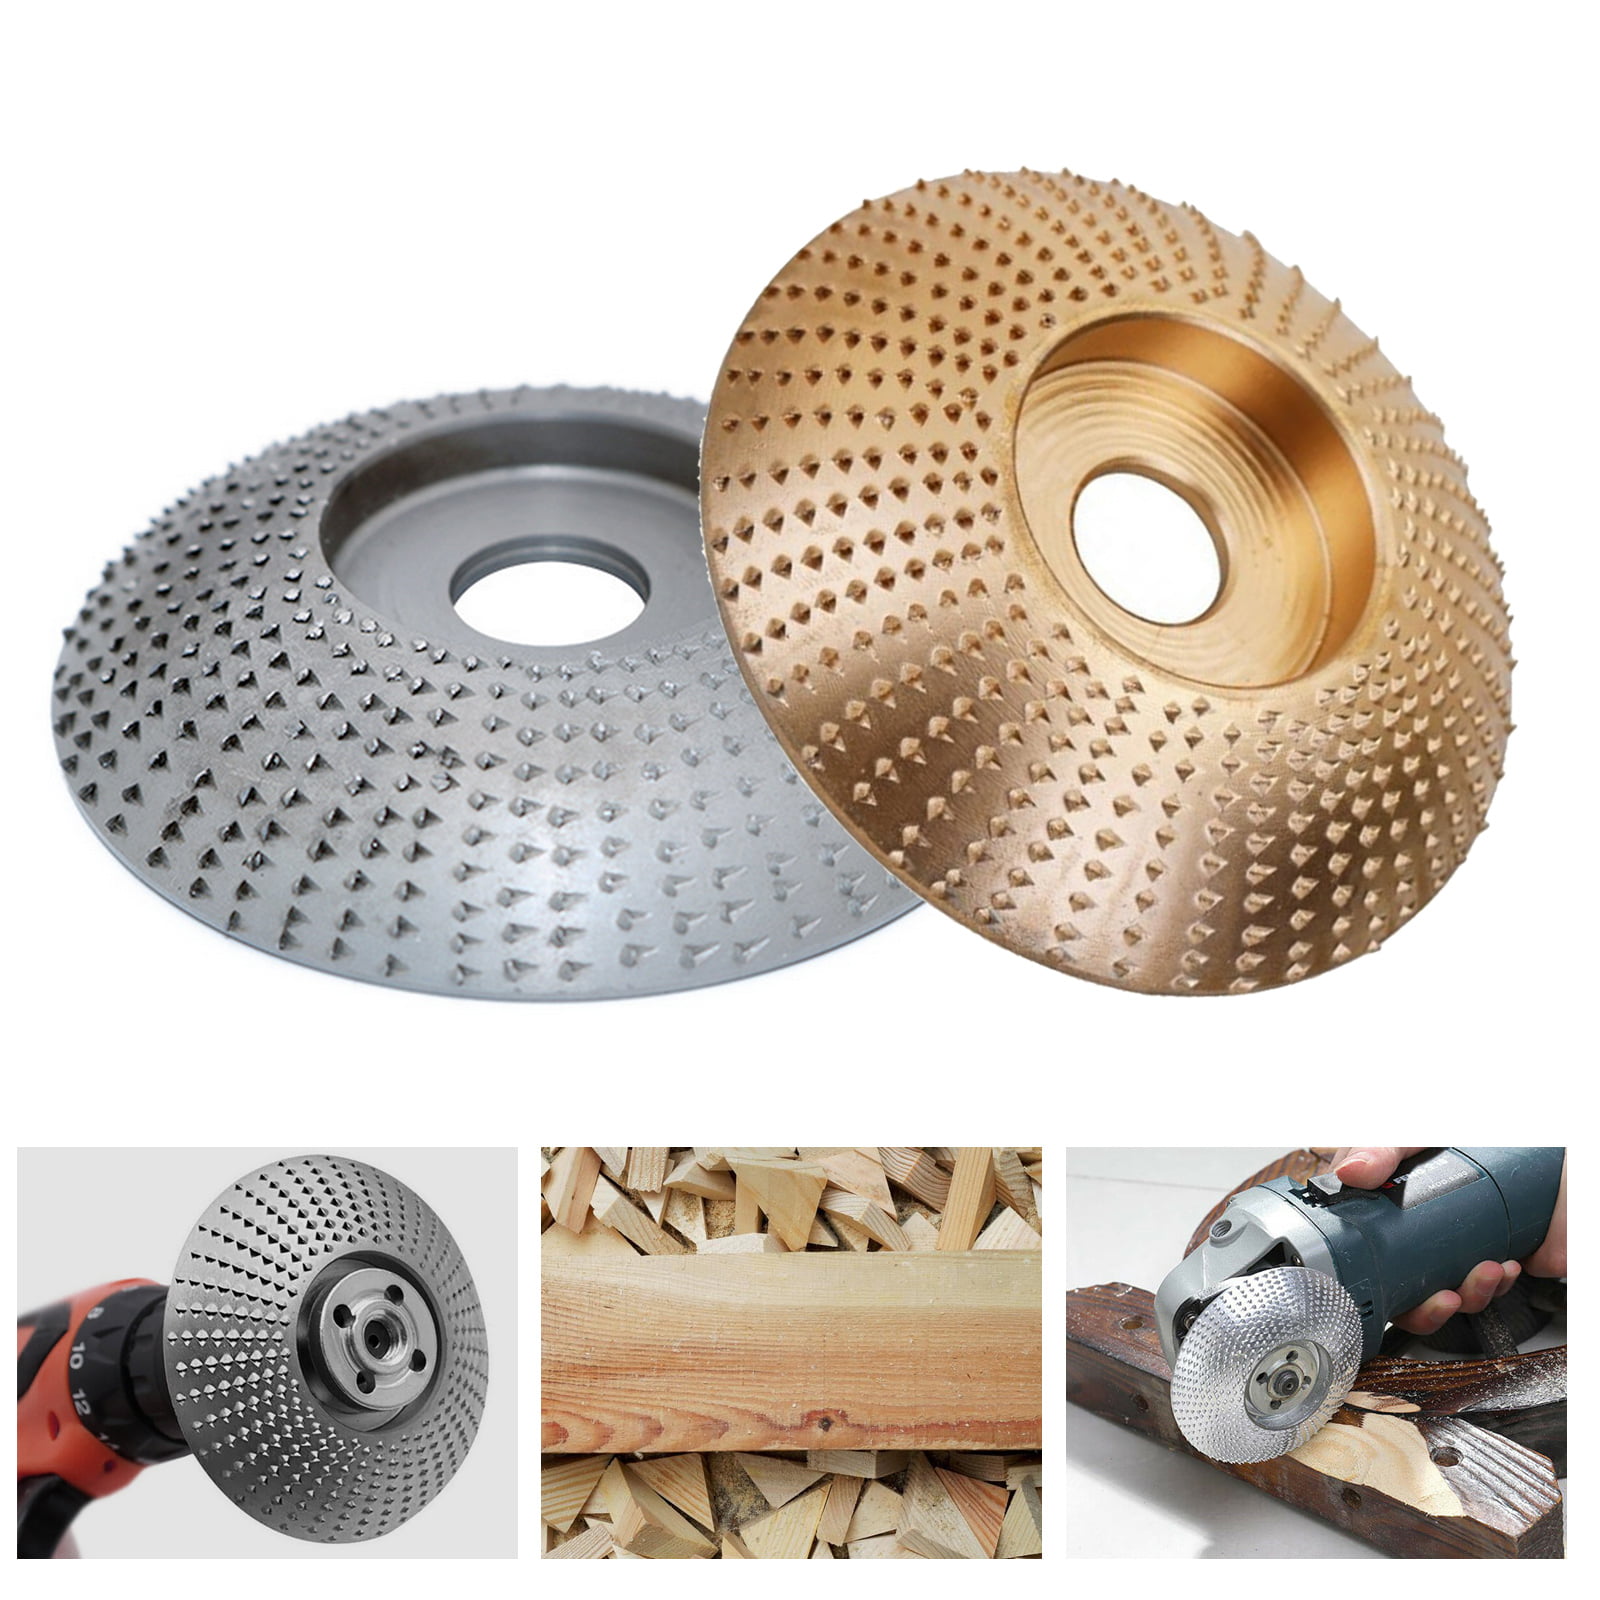 FOR Angle Grinder Grinding Wheel 3.3'' Carbide Wood Sanding Carving Shaping Disc 